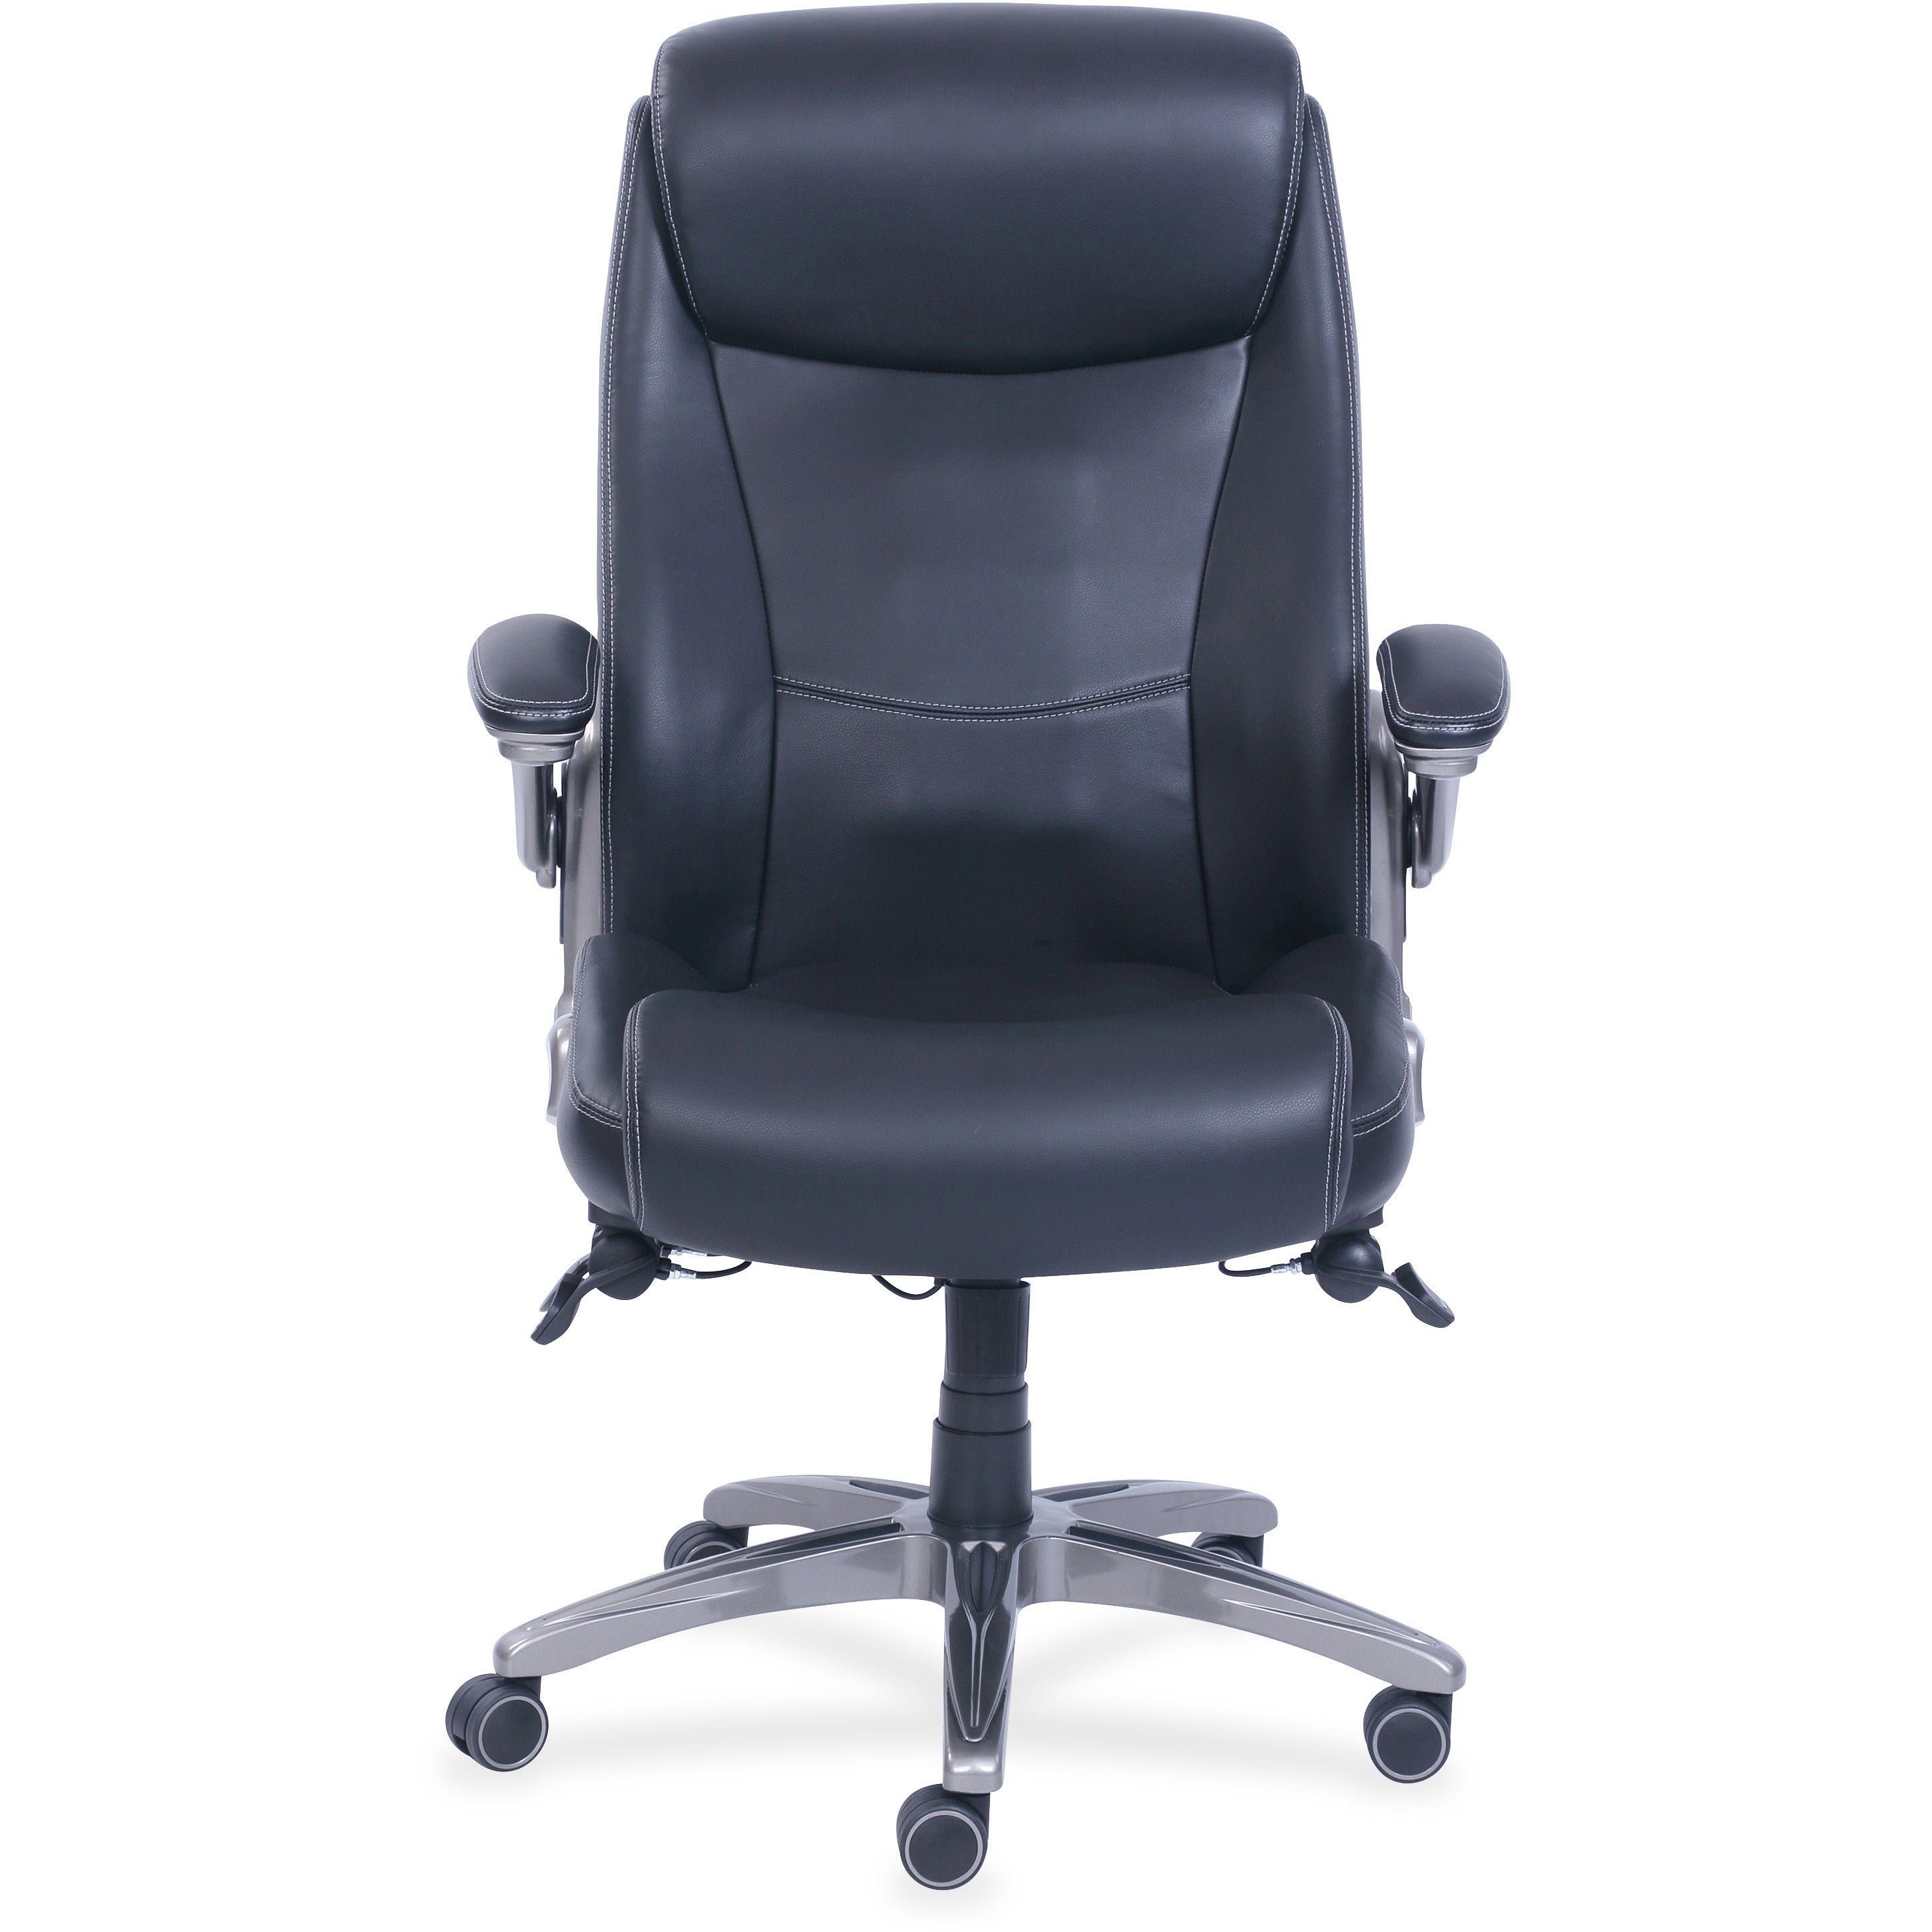 lorell-wellness-by-design-revive-executive-office-chair-black-bonded-leather-seat-black-bonded-leather-back-5-star-base-1-each_llr48730 - 2